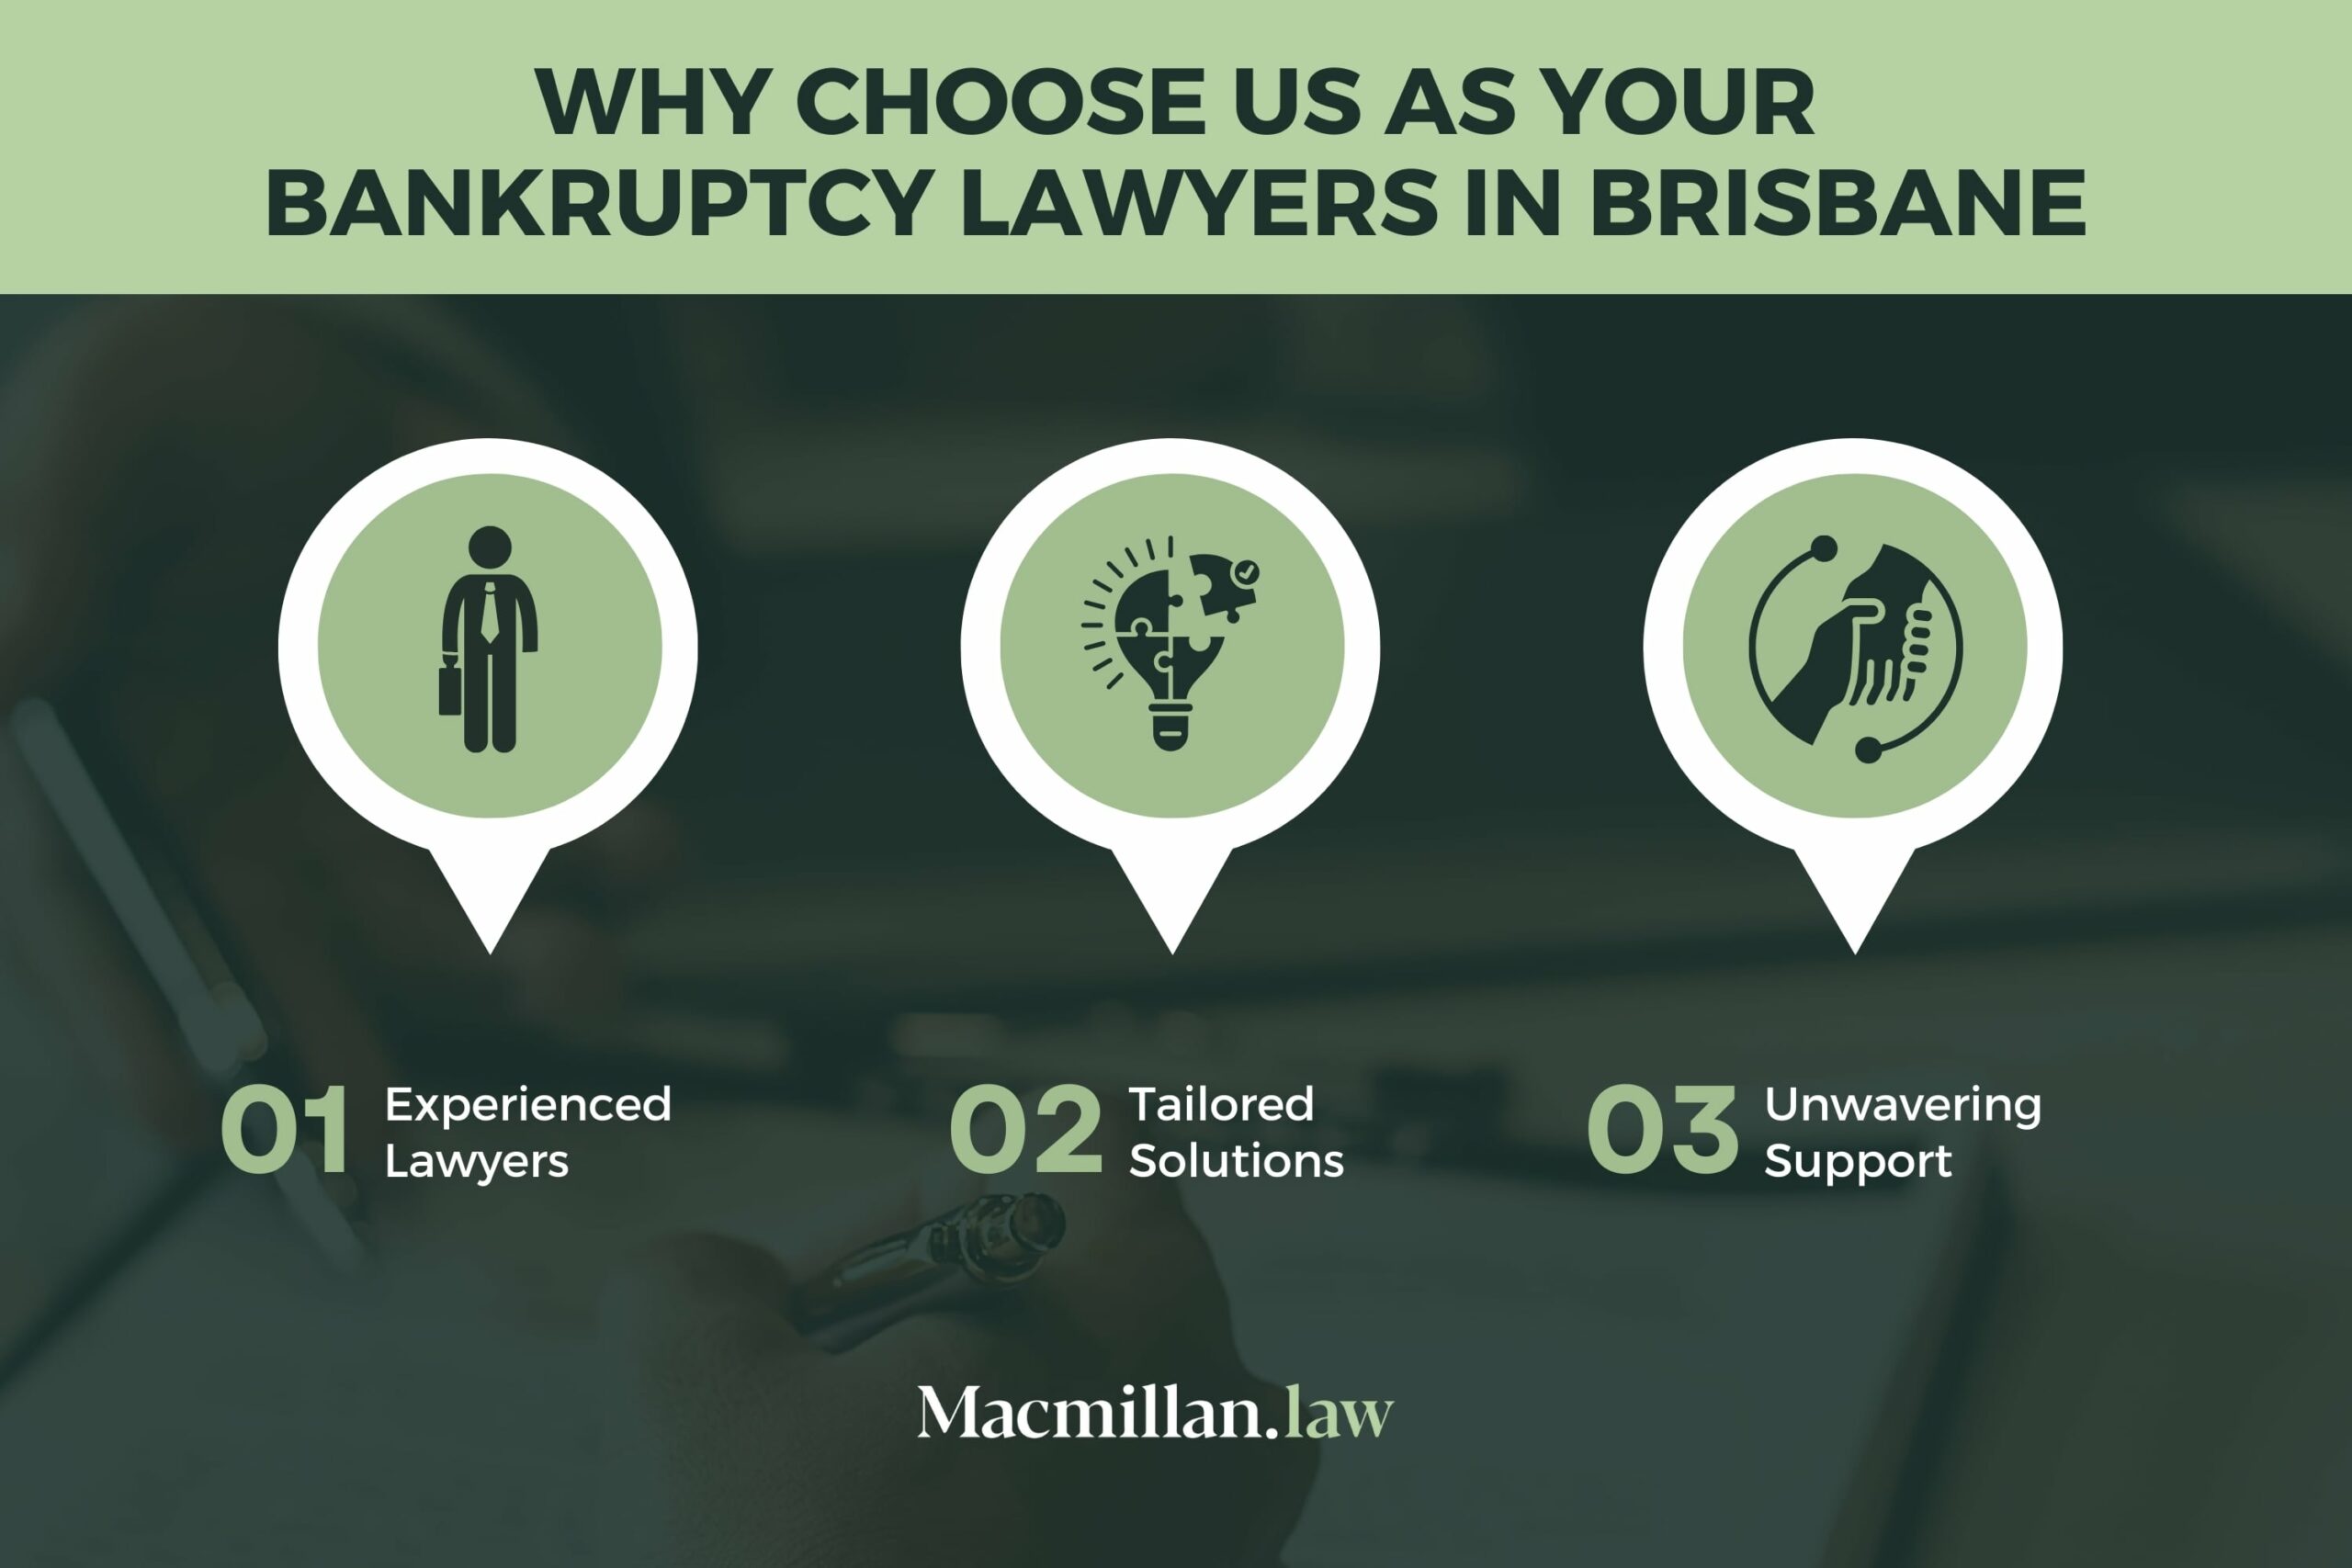 Why choose us as your bankruptcy lawyers in Brisbane